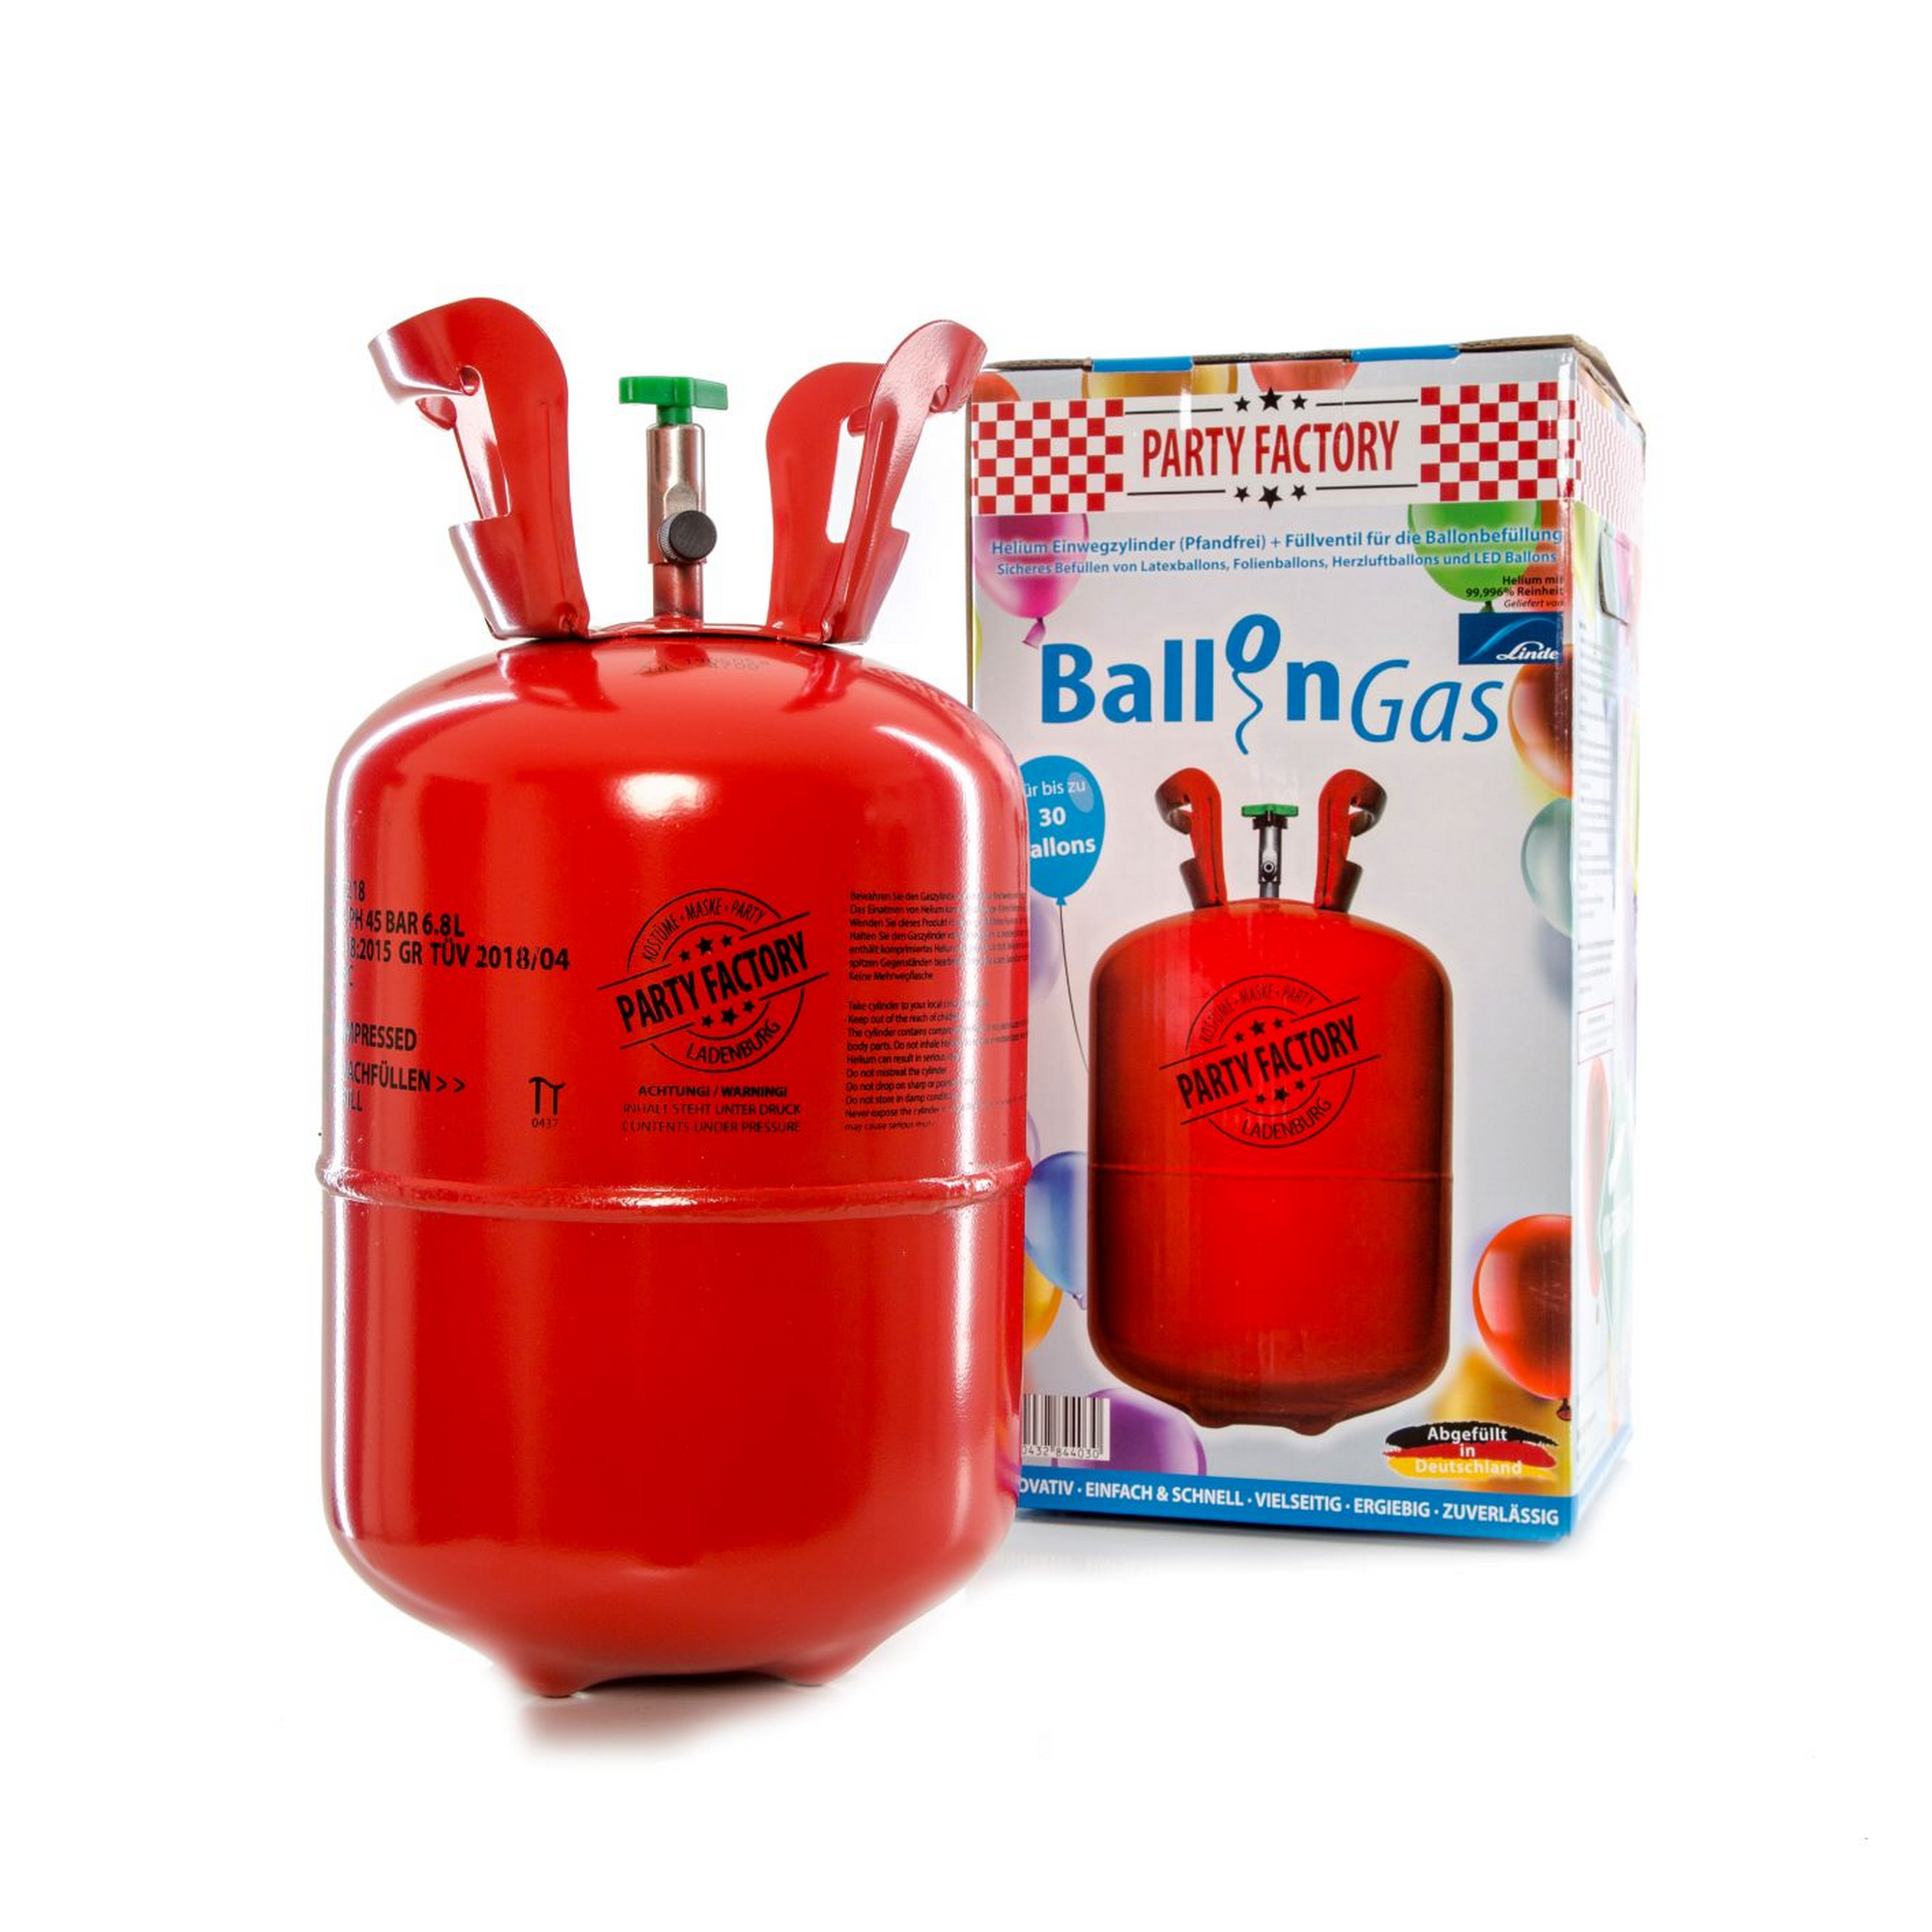 Ballongas-Helium 0,2 m³ inklusive 30 Latexballons + product picture